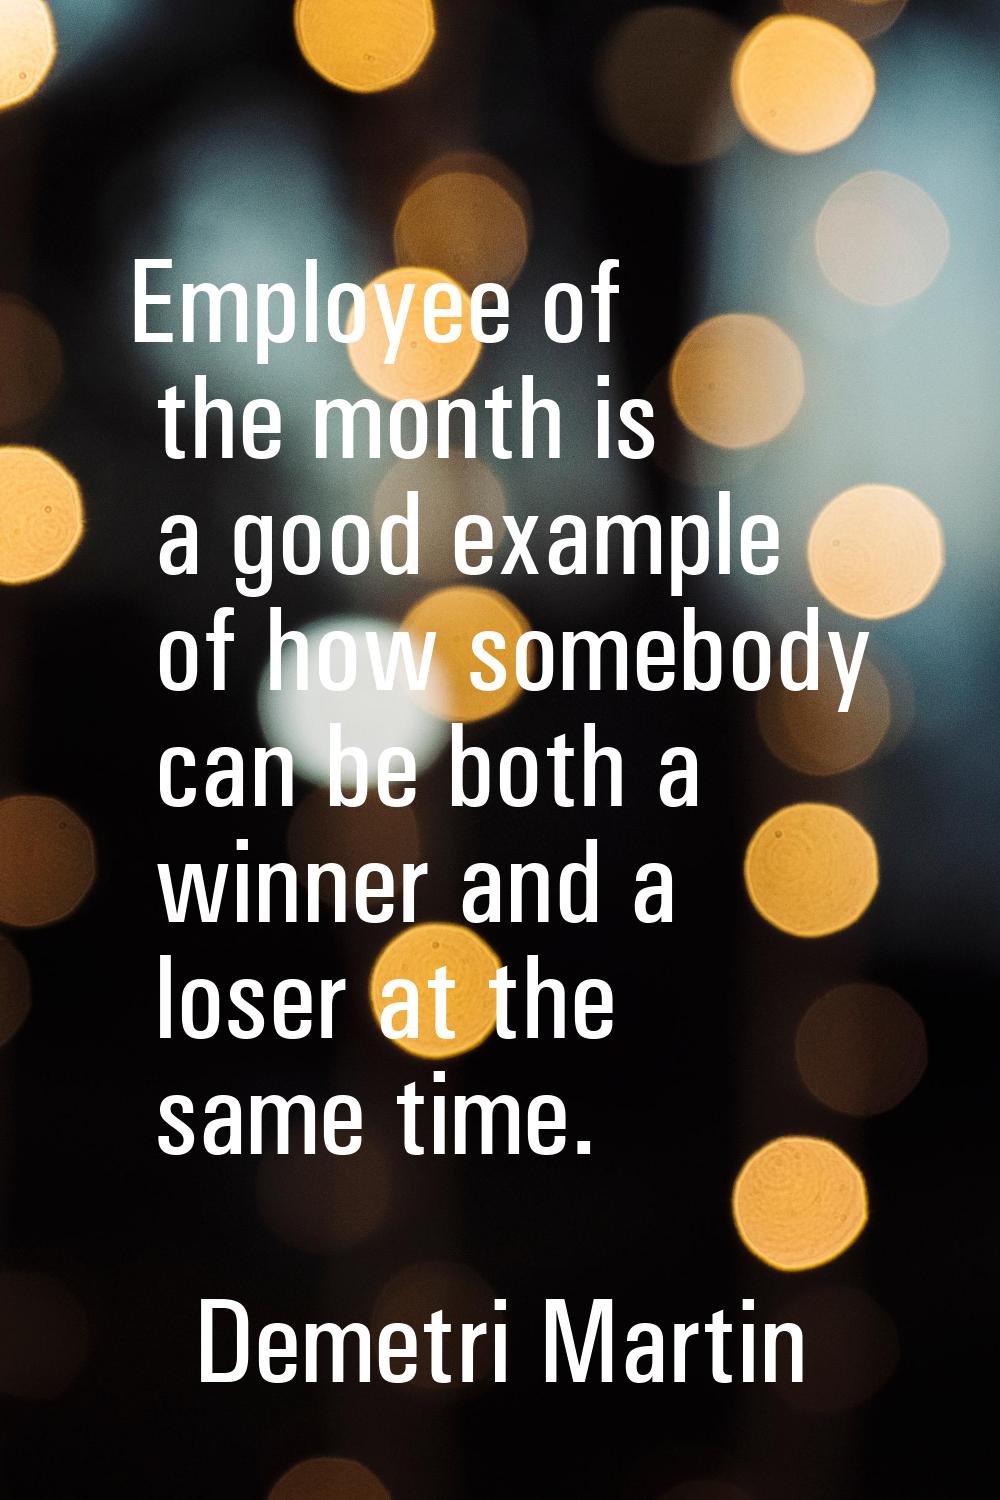 Employee of the month is a good example of how somebody can be both a winner and a loser at the sam